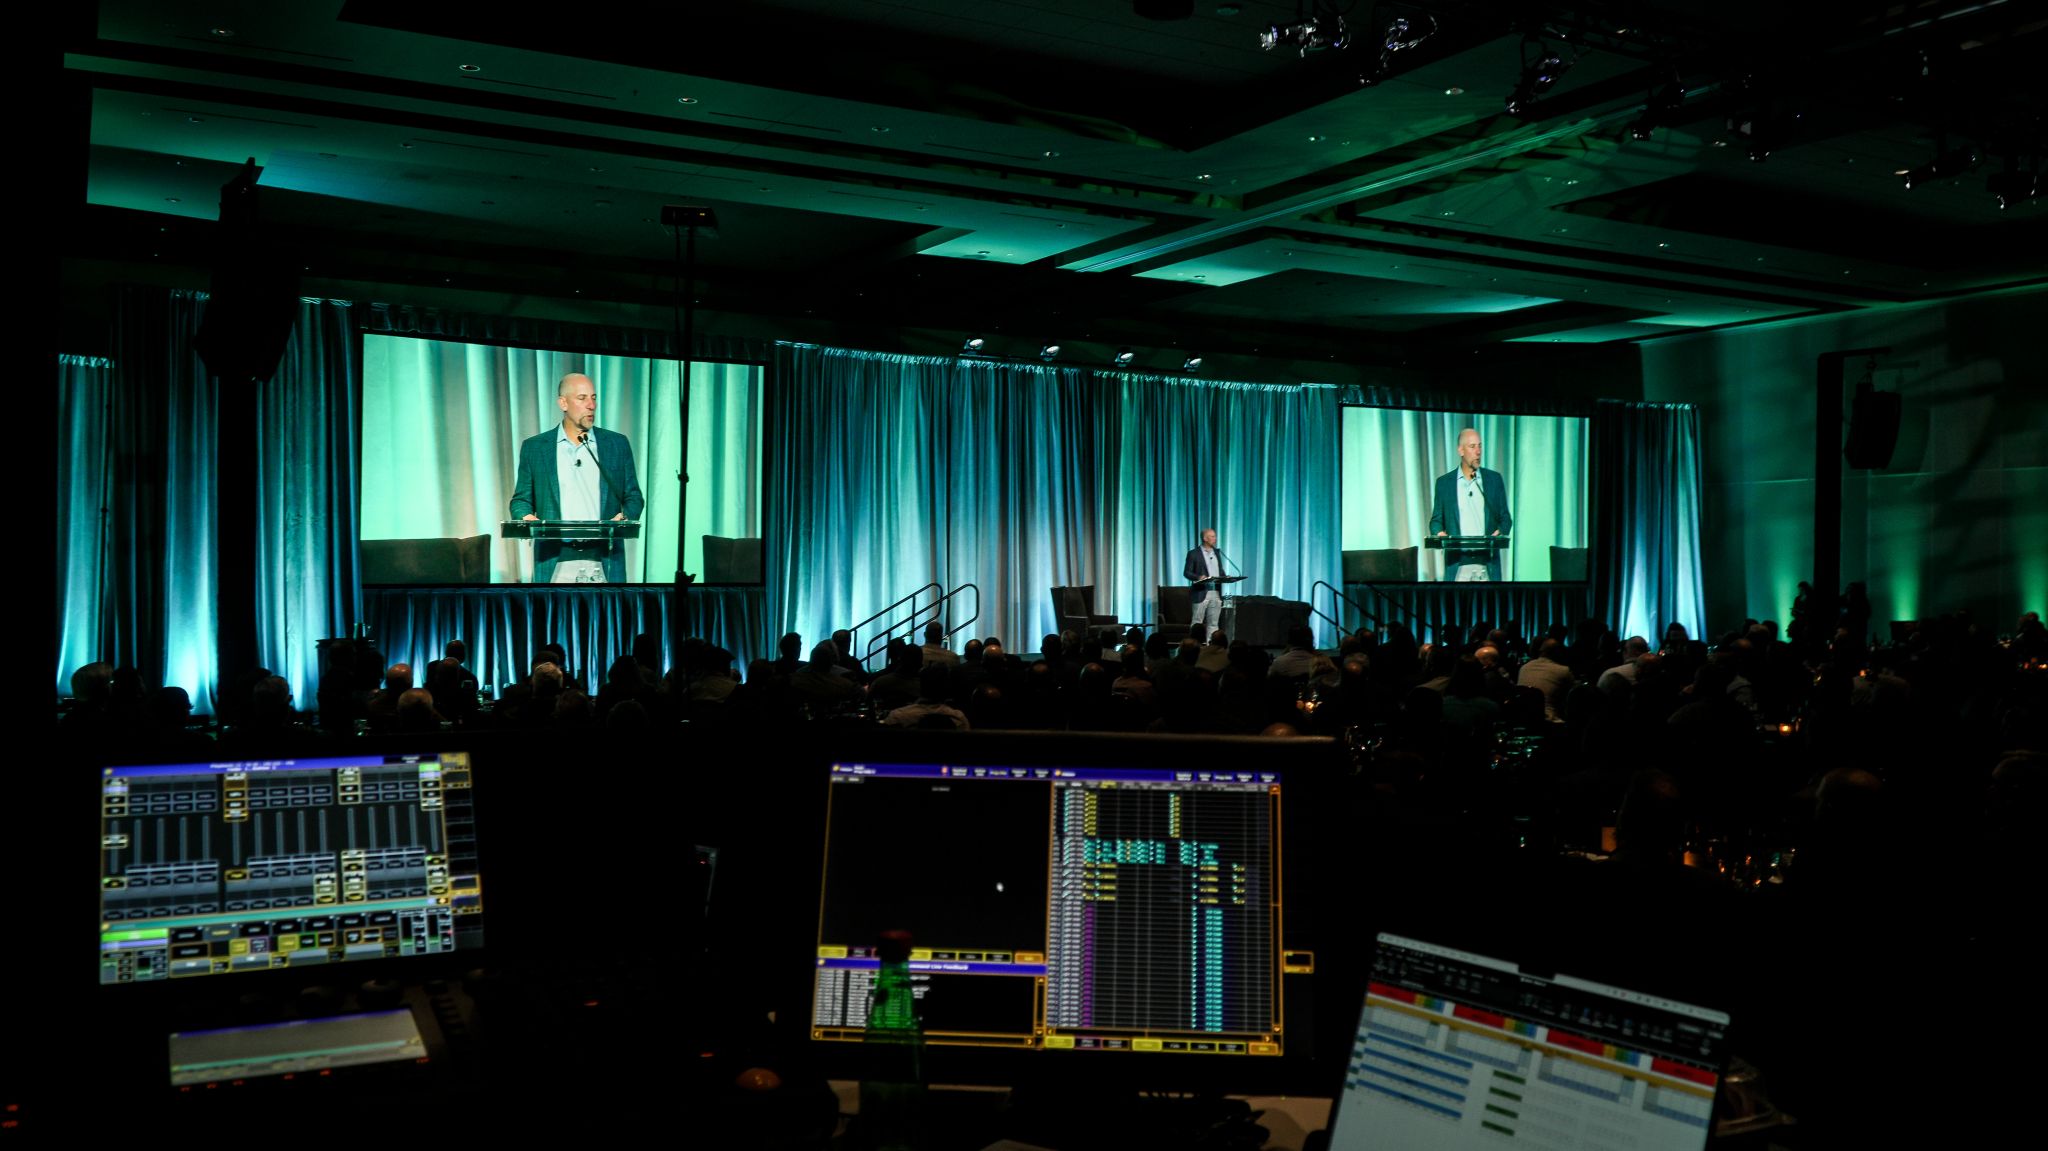 Stage setup and lighting for Badger's annual sales meeting at Talking Stick Resort